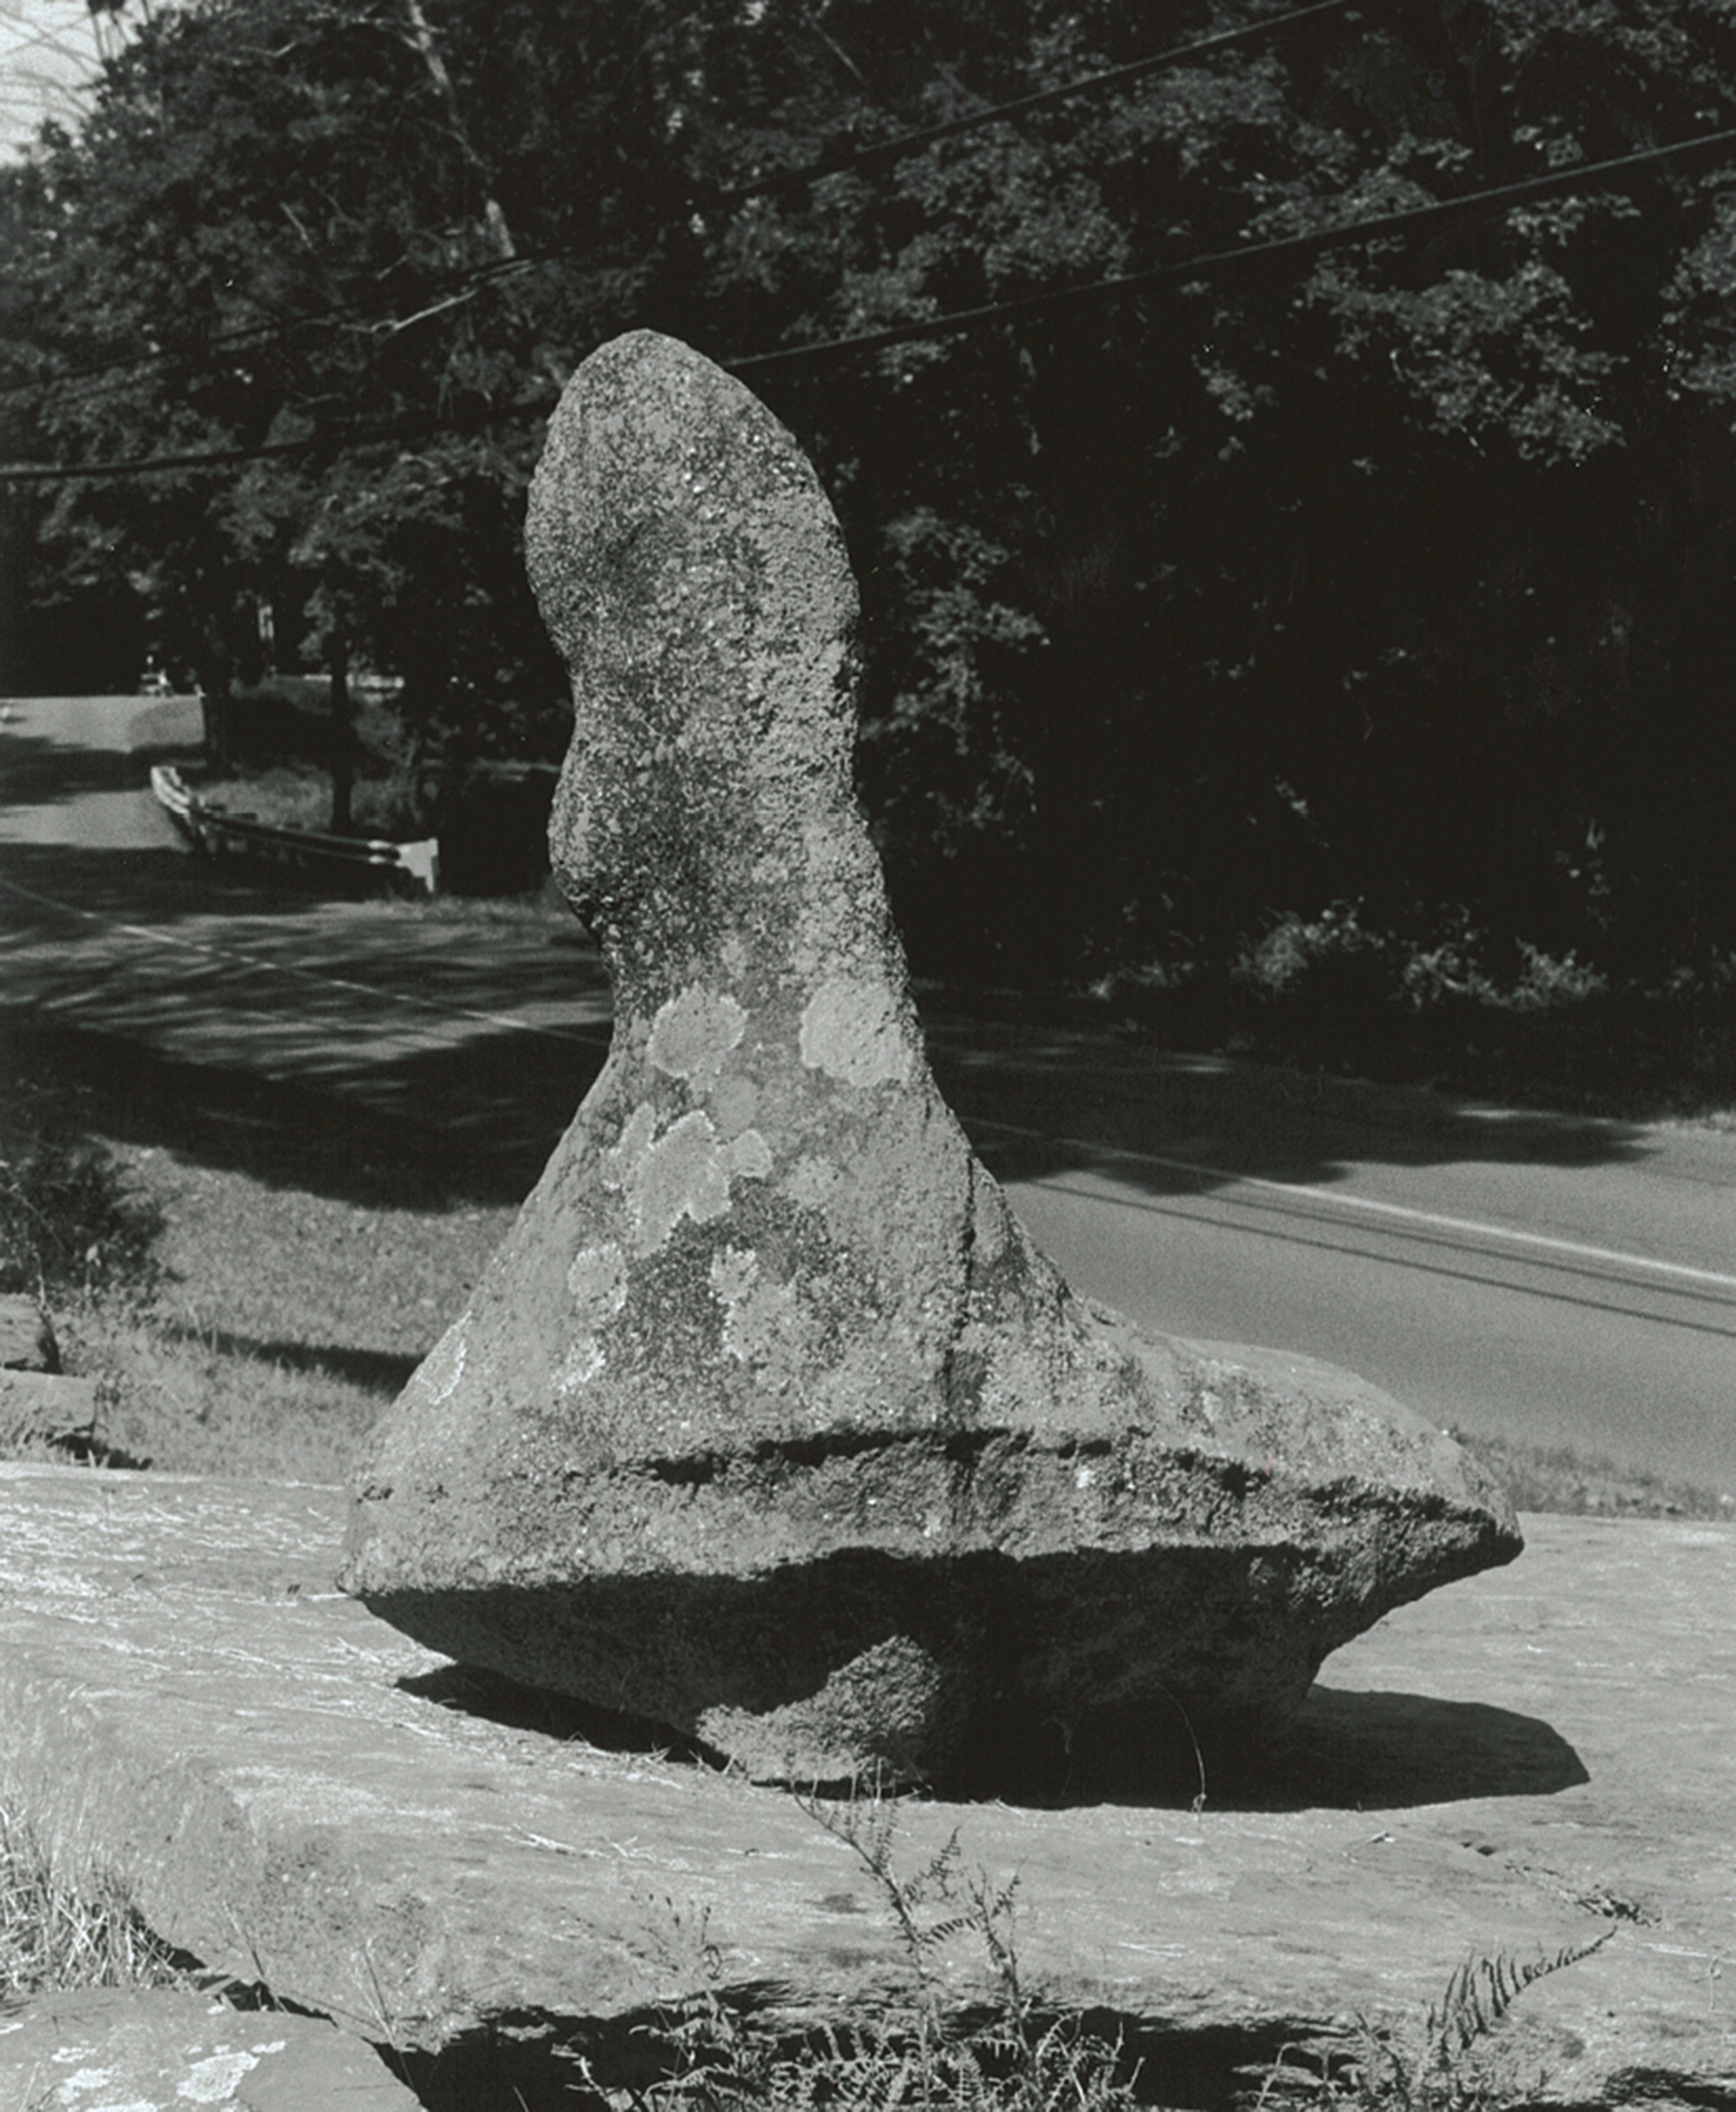 A photograph of an anthropomorphic erratic stone in Newtown, Connecticut, which measures 38 inches high.